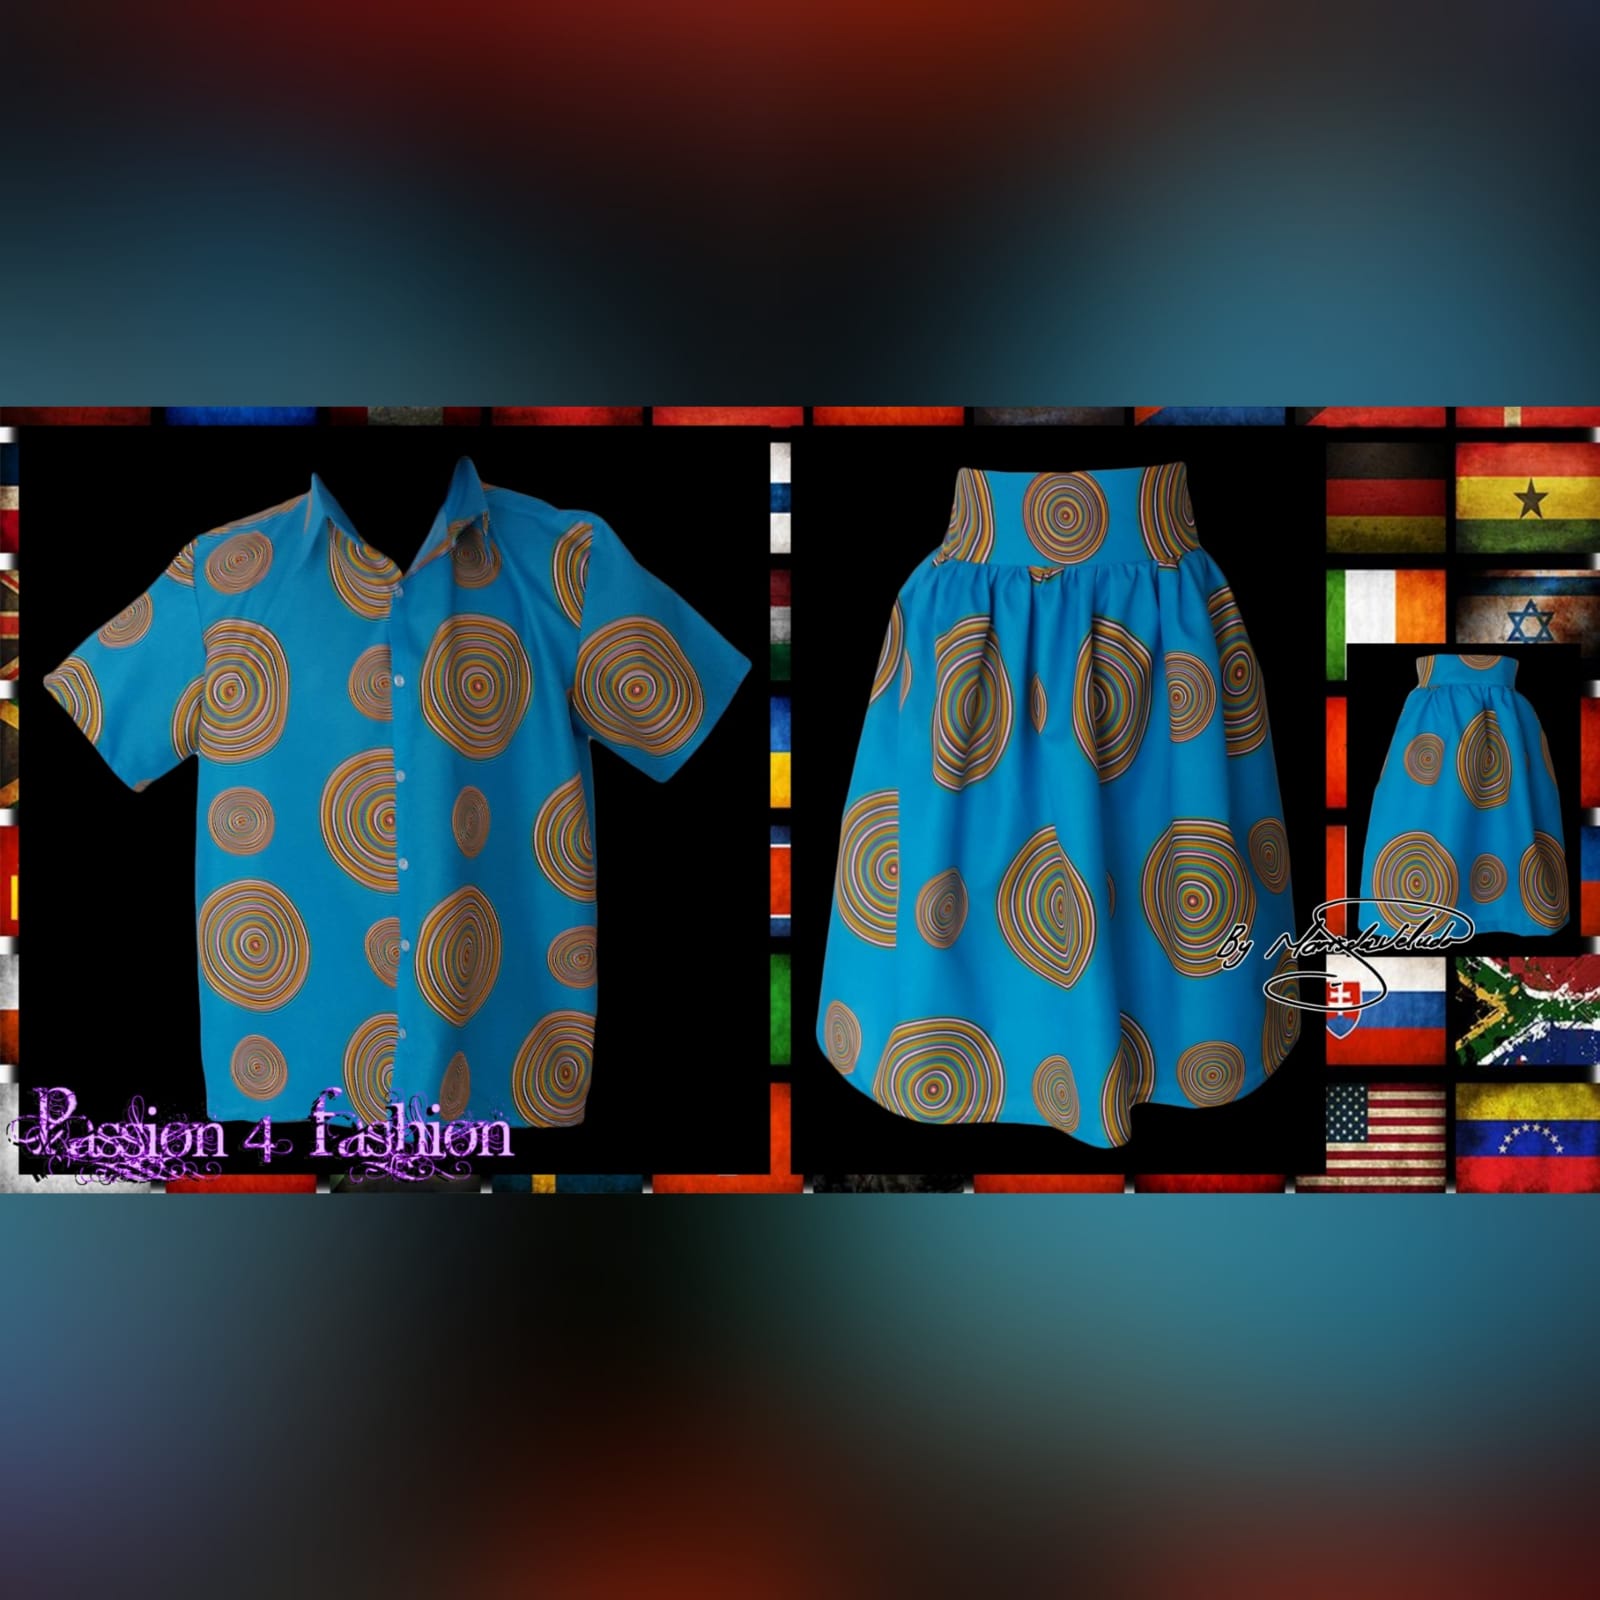 Matching venda traditional outfits for the family 2 venda traditional matching family items. Ladies high waisted skirt and girls matching skirt. With men's matching shirt.